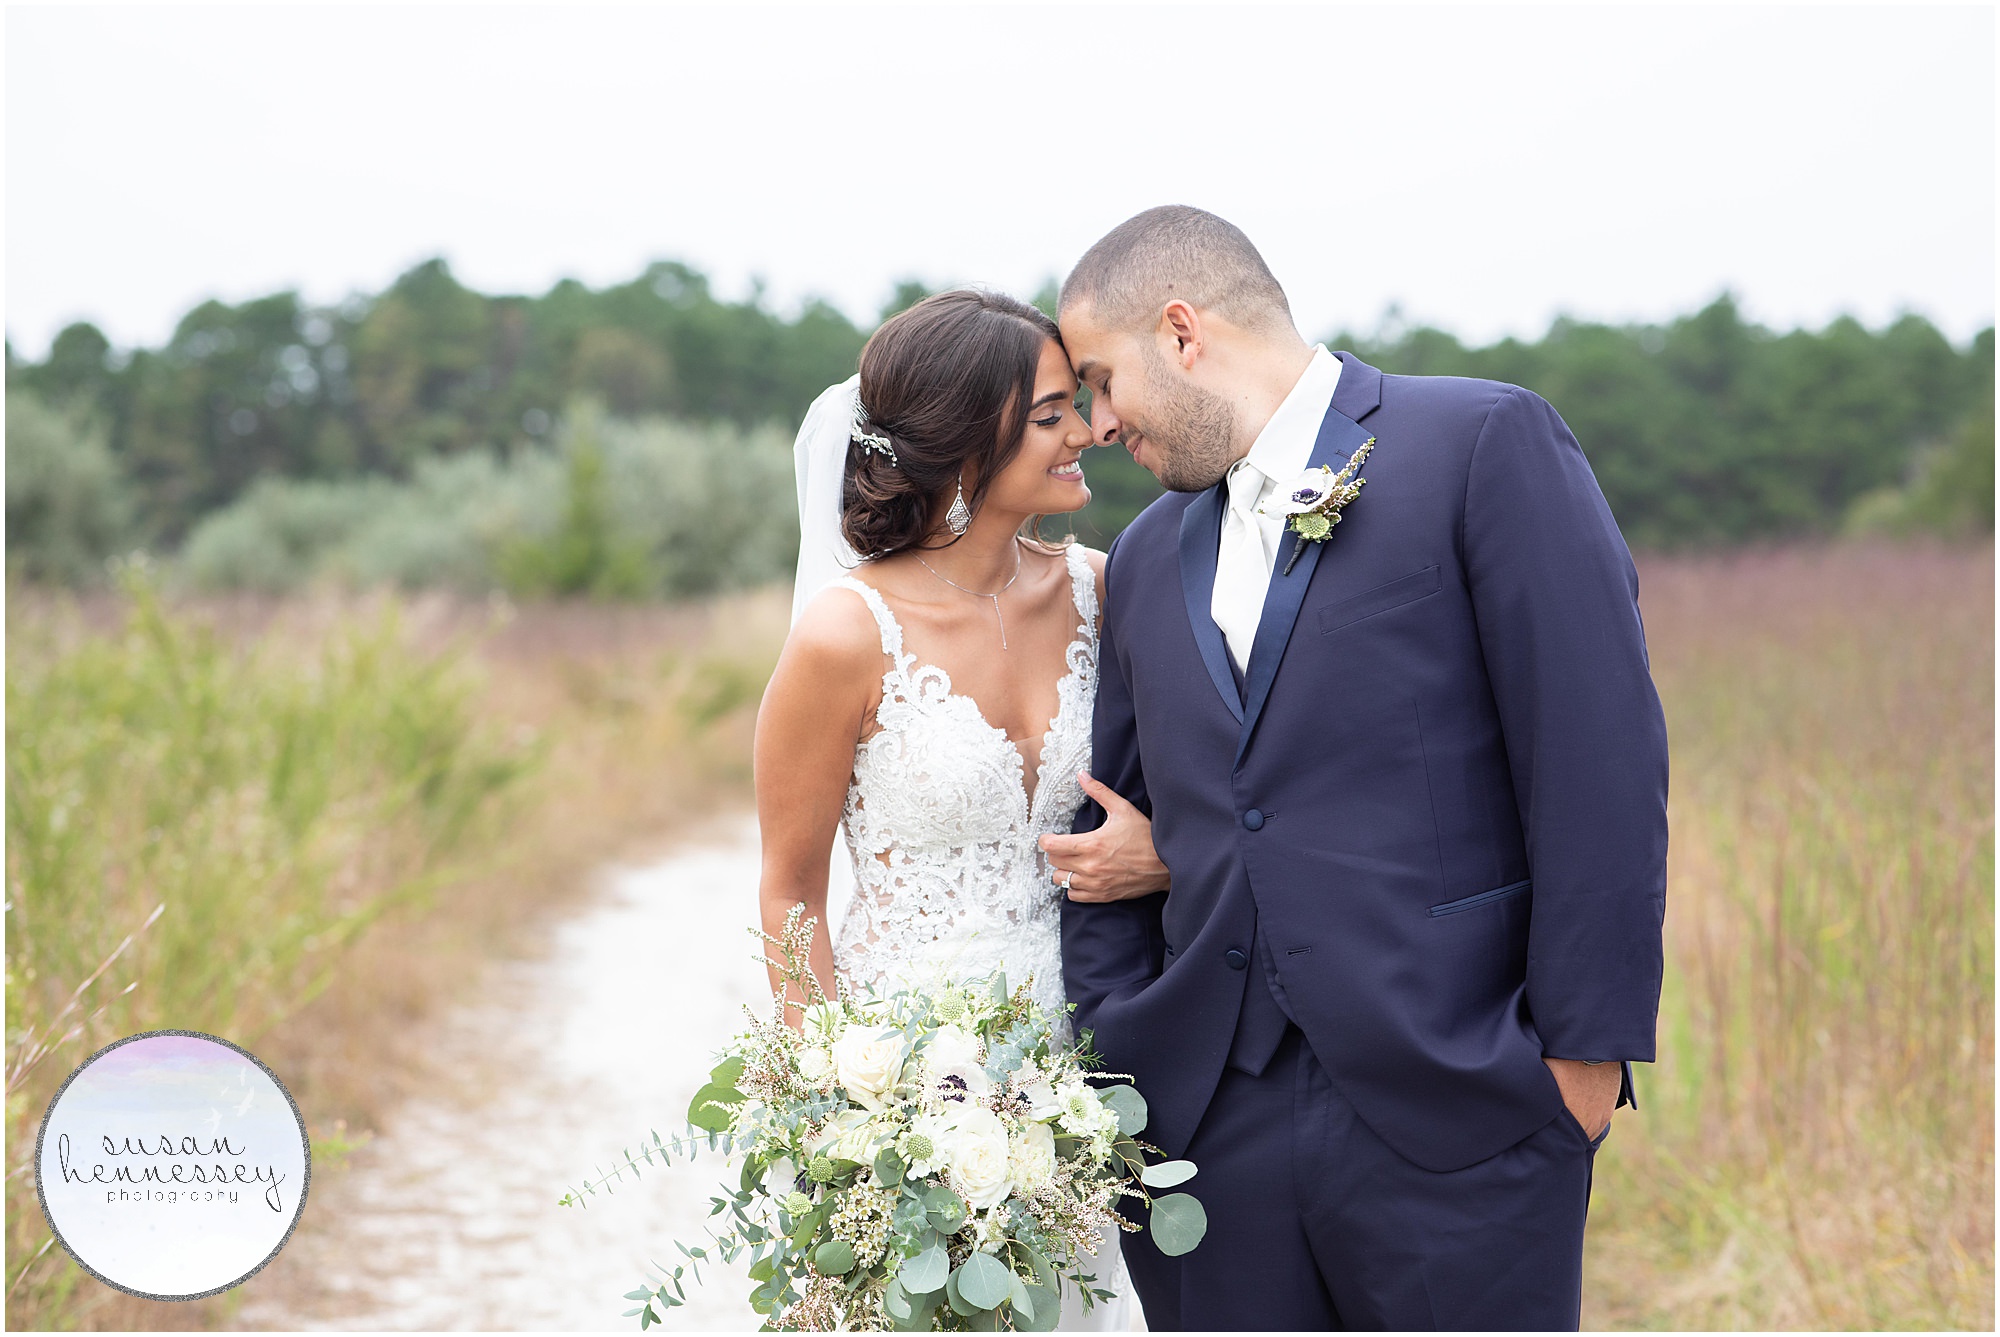 Susan Hennessey Photography is a South Jersey wedding photographer who captured this stunning Renault Winery wedding